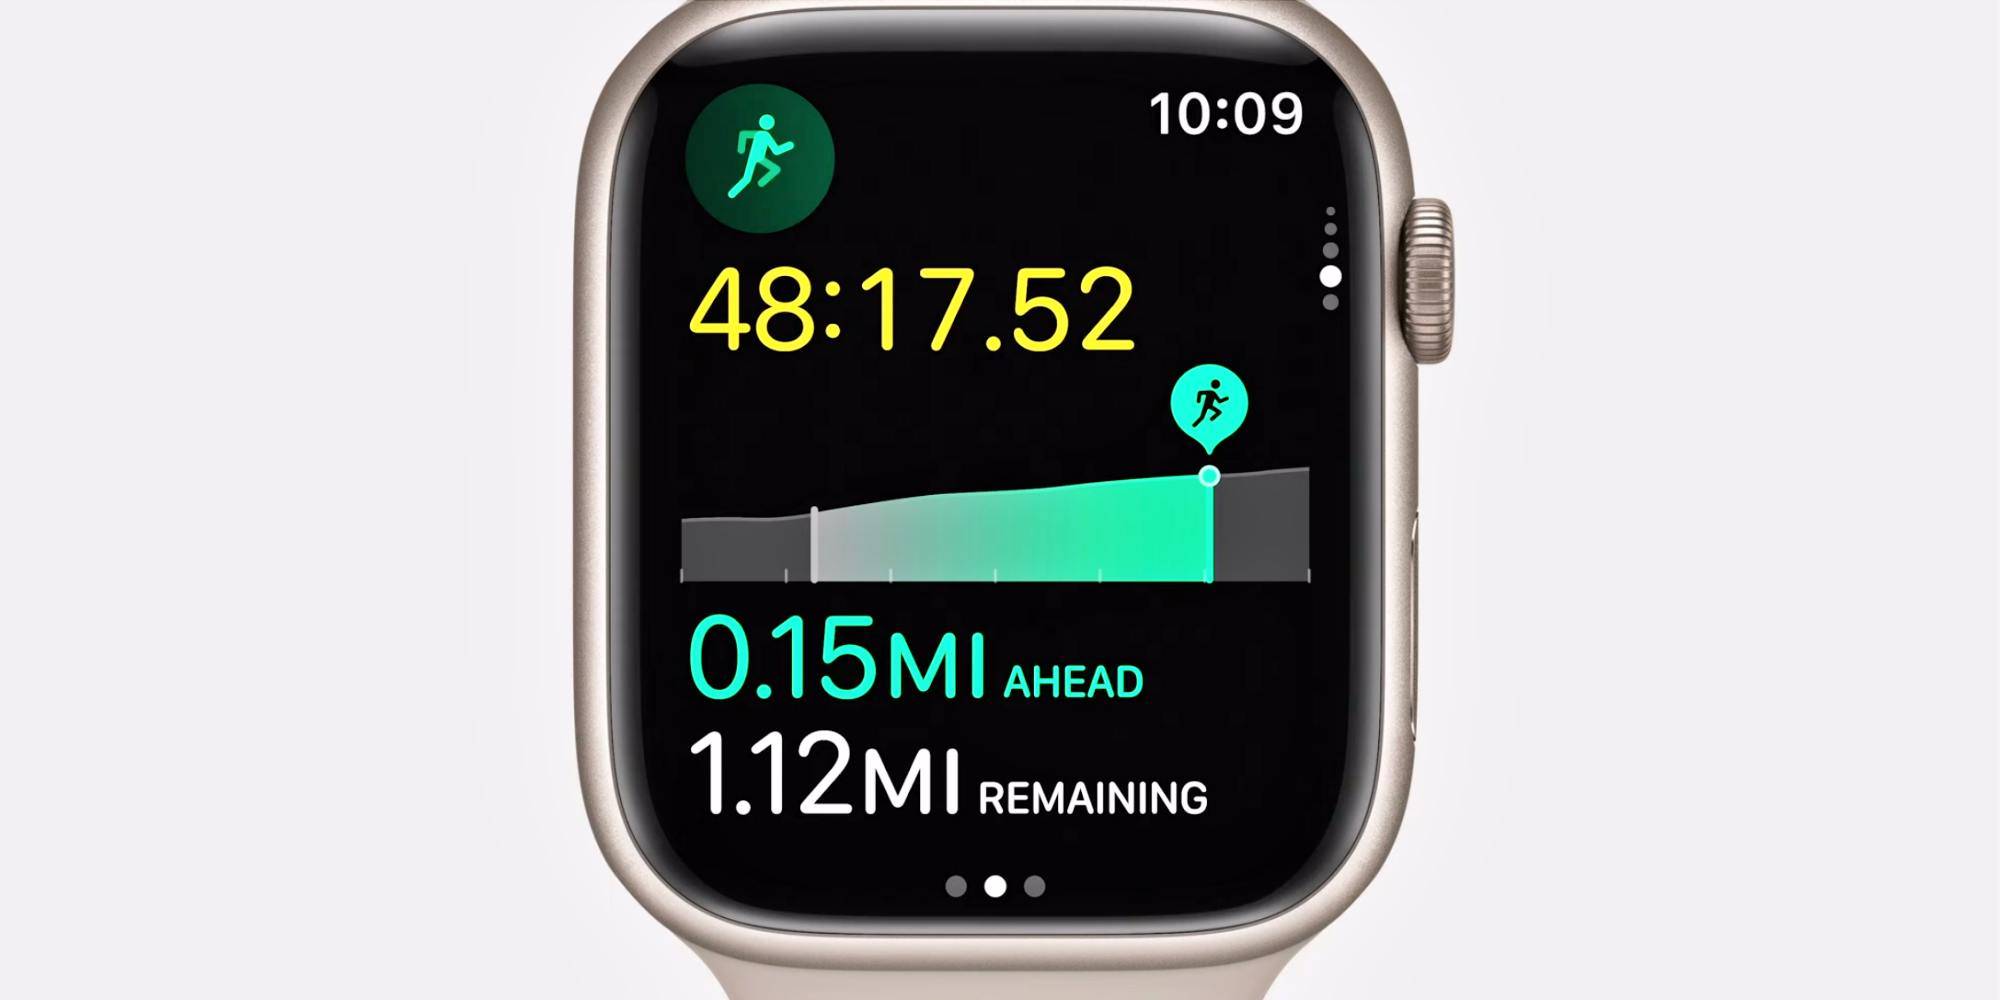 Apple-Watch-OS9-Fitness-Pace-Mode